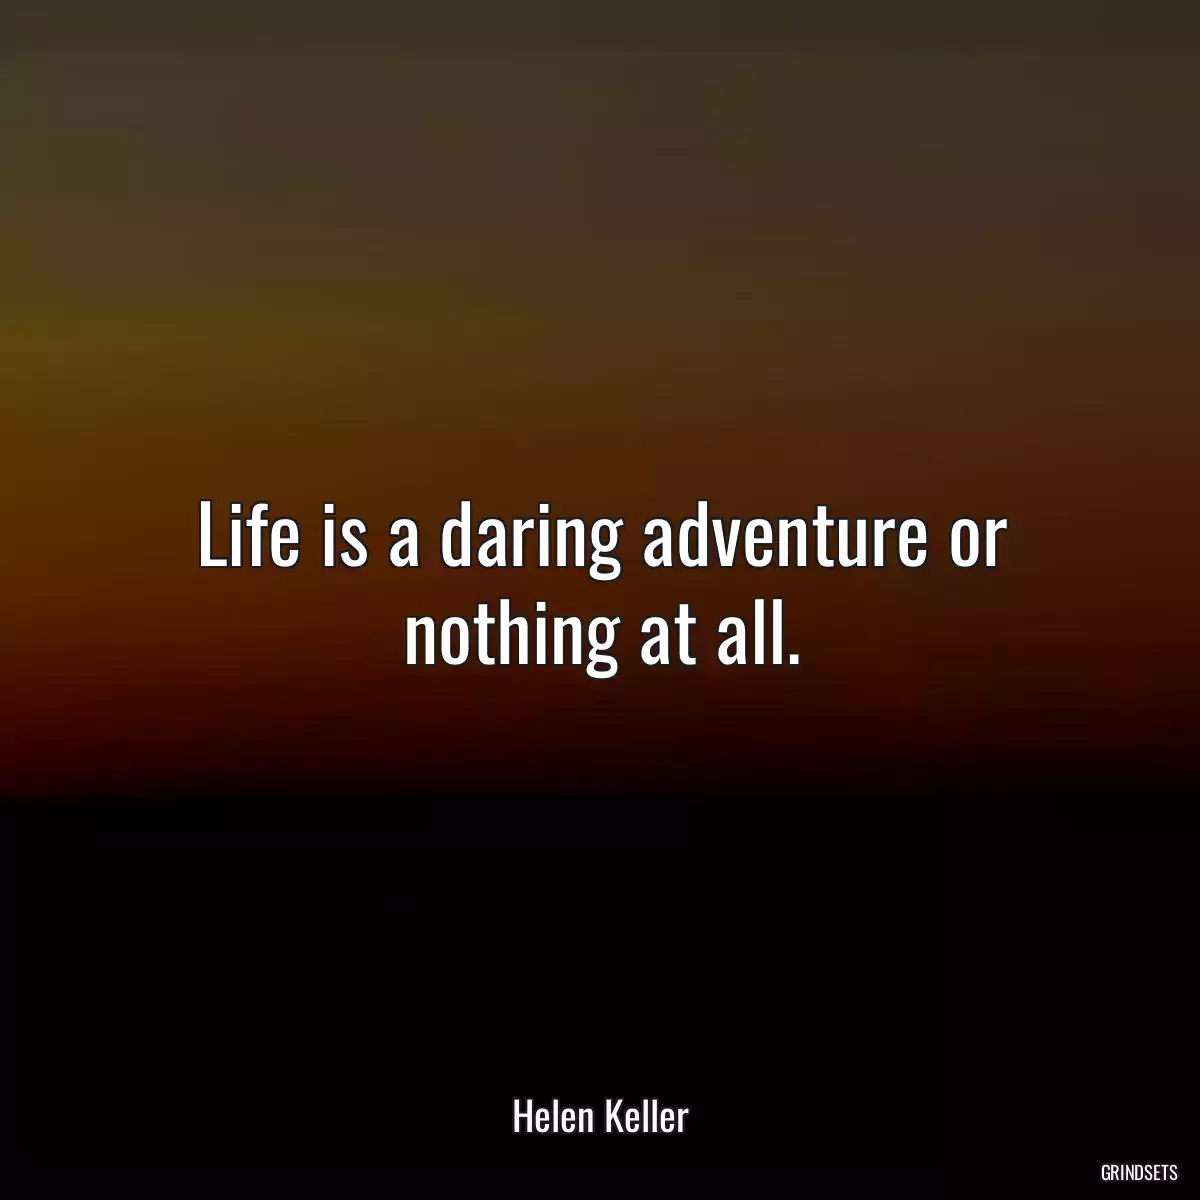 Life is a daring adventure or nothing at all.